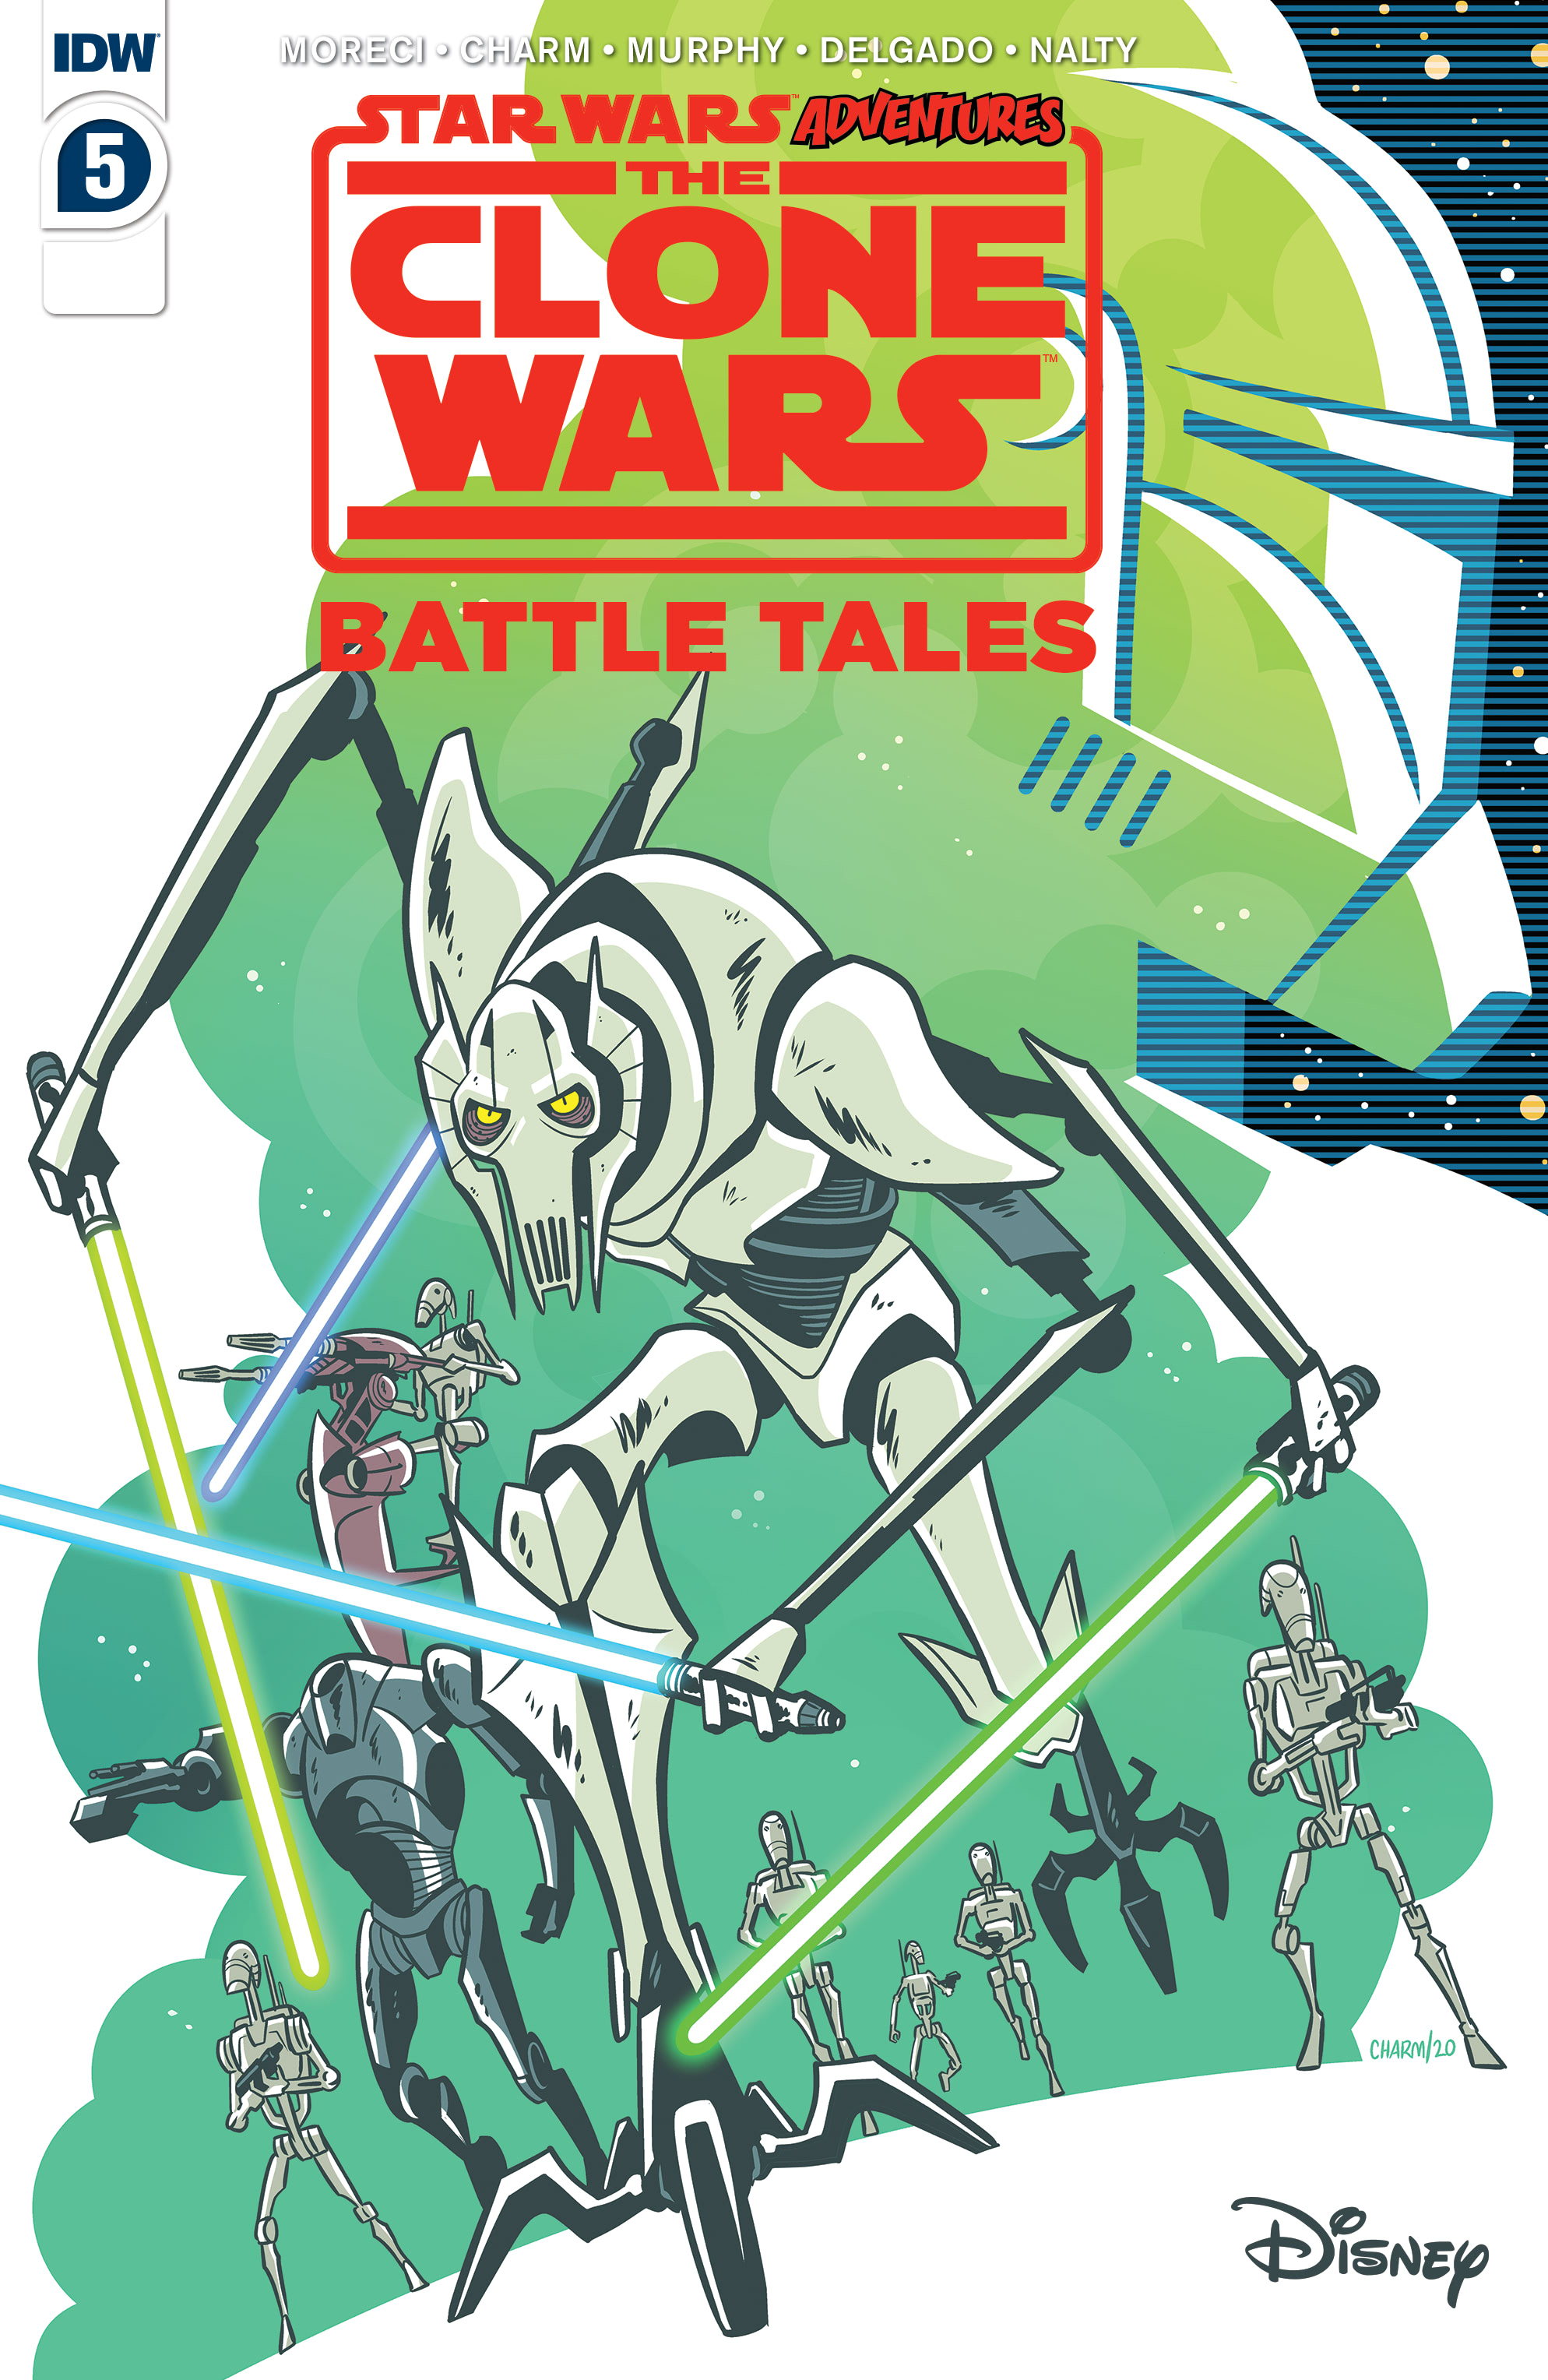 Star Wars Adventures: The Clone Wars-Battle Tales issue 5 - Page 1